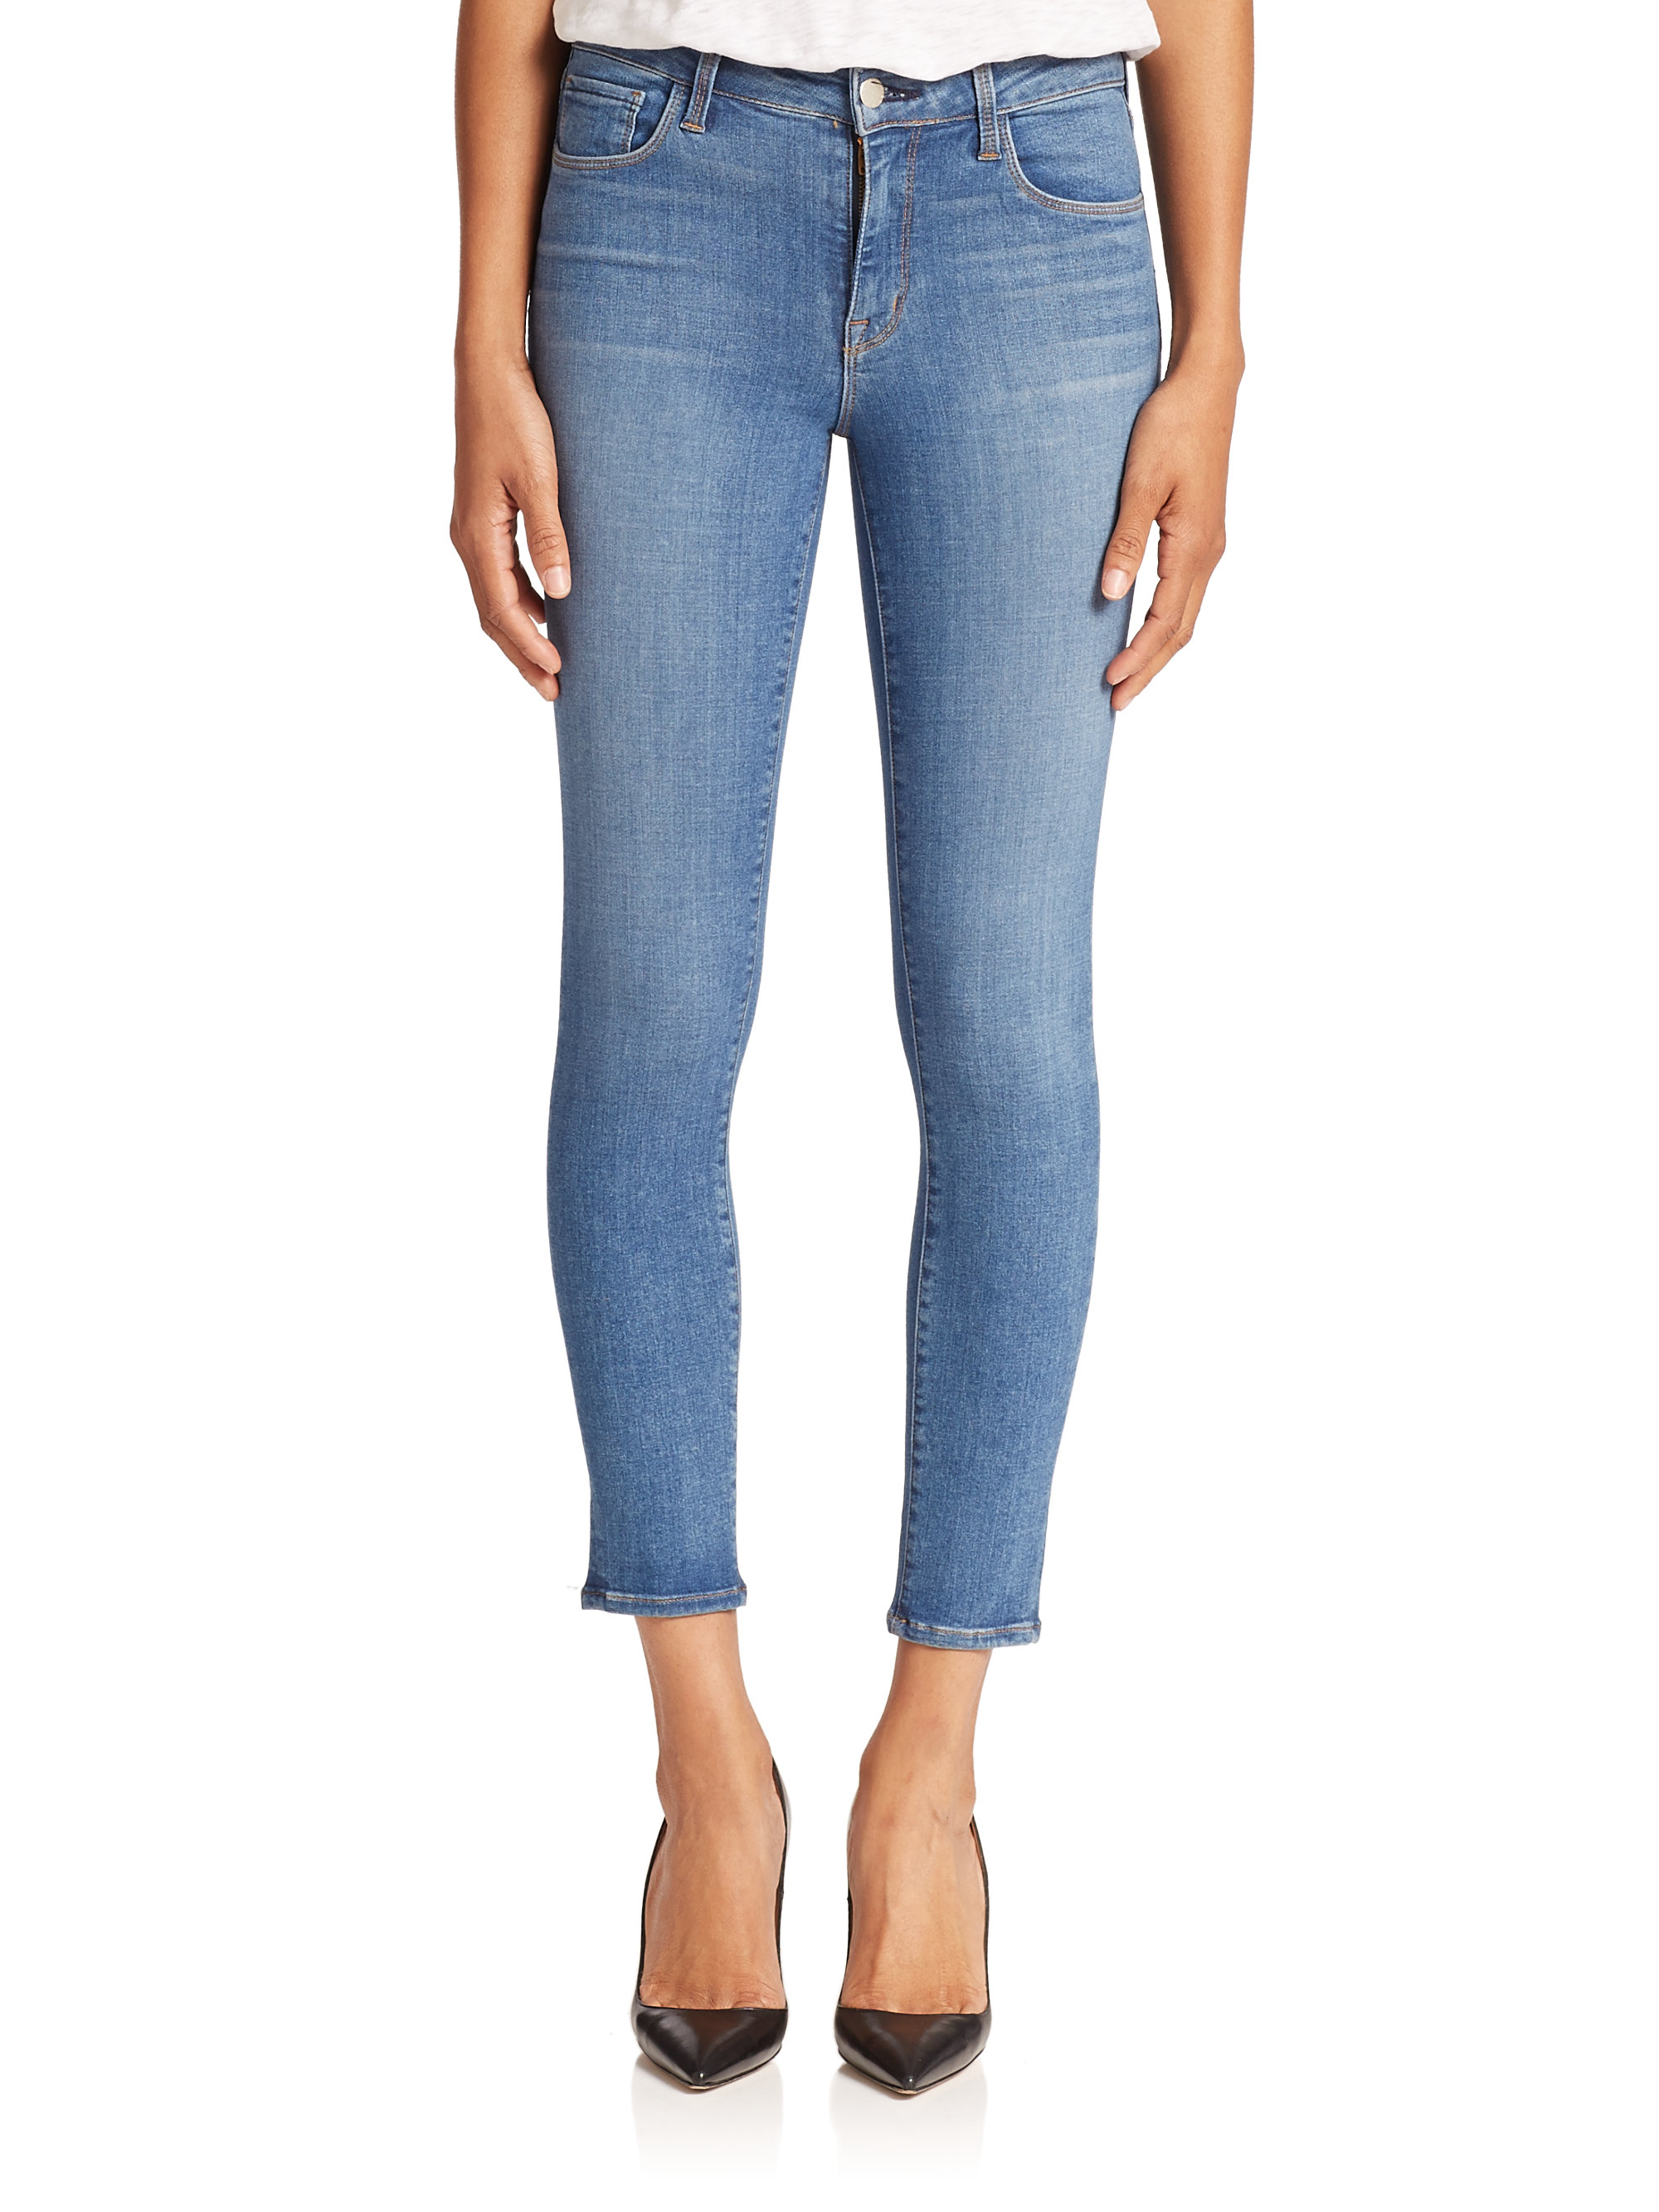 9 Awesome Women's High Rise Jeans That will Attractive You